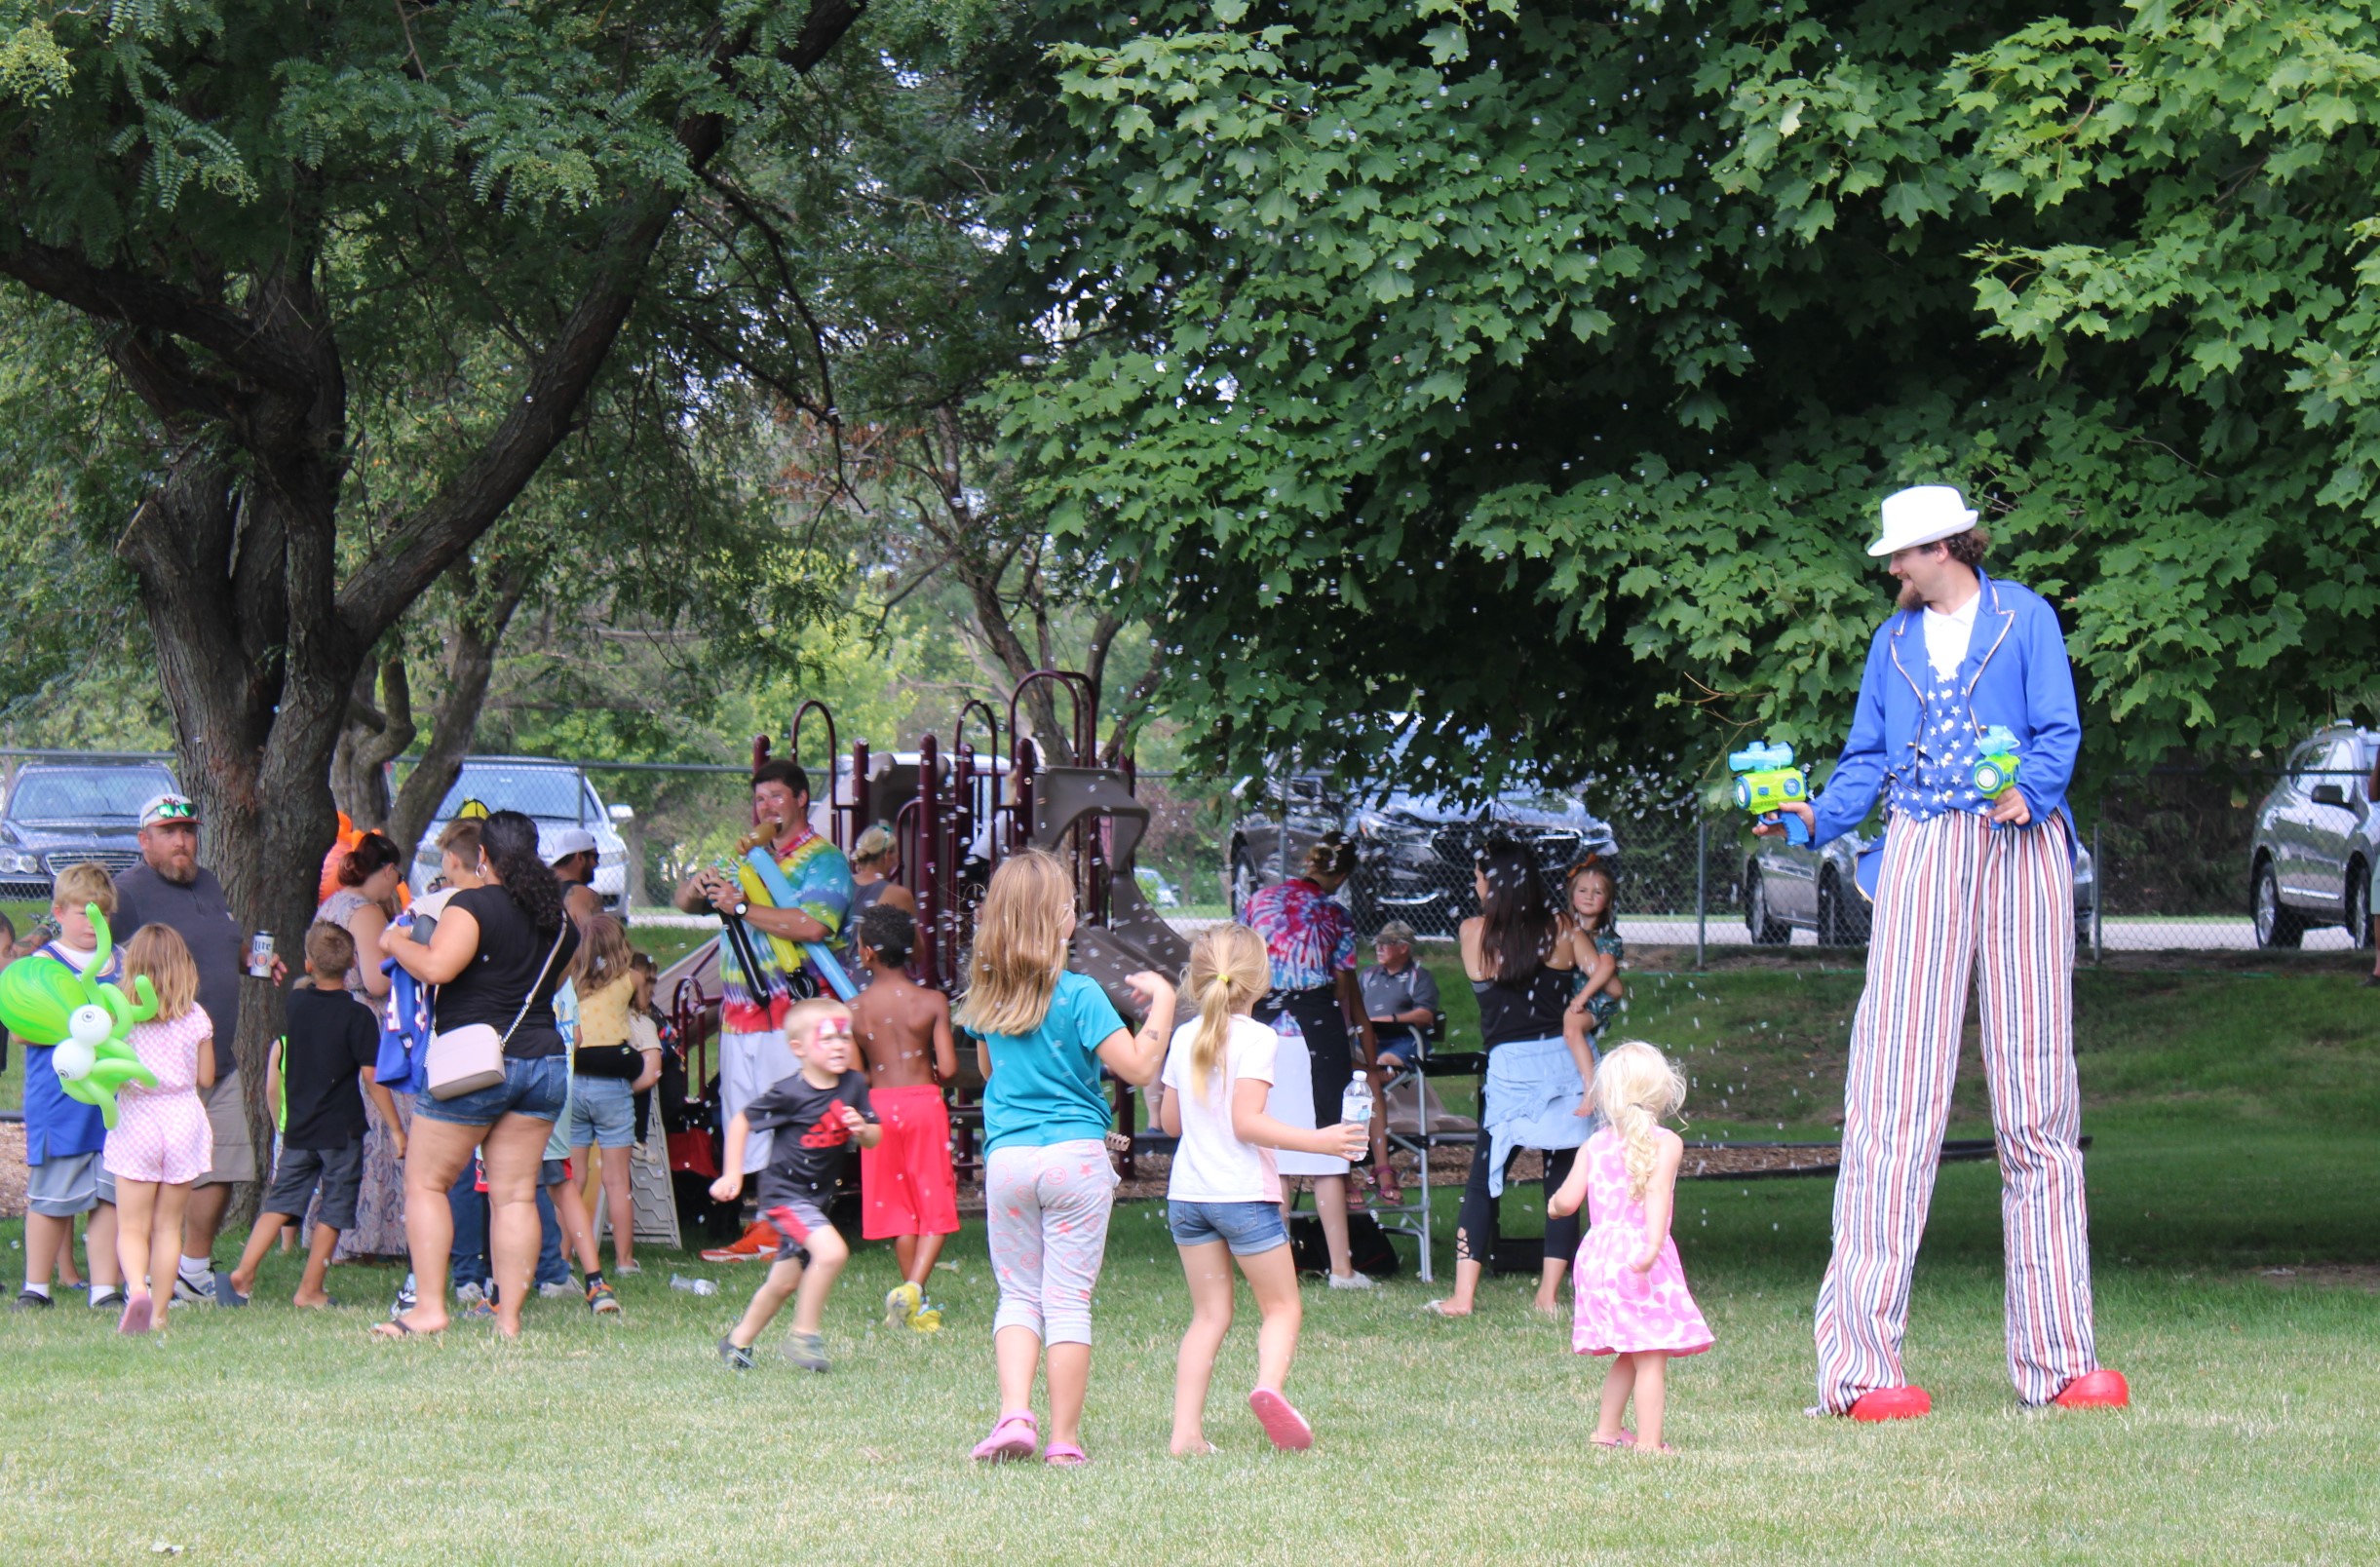 Children and adults gather in the park as performers entertain Photo by Penny Gruetzmacher